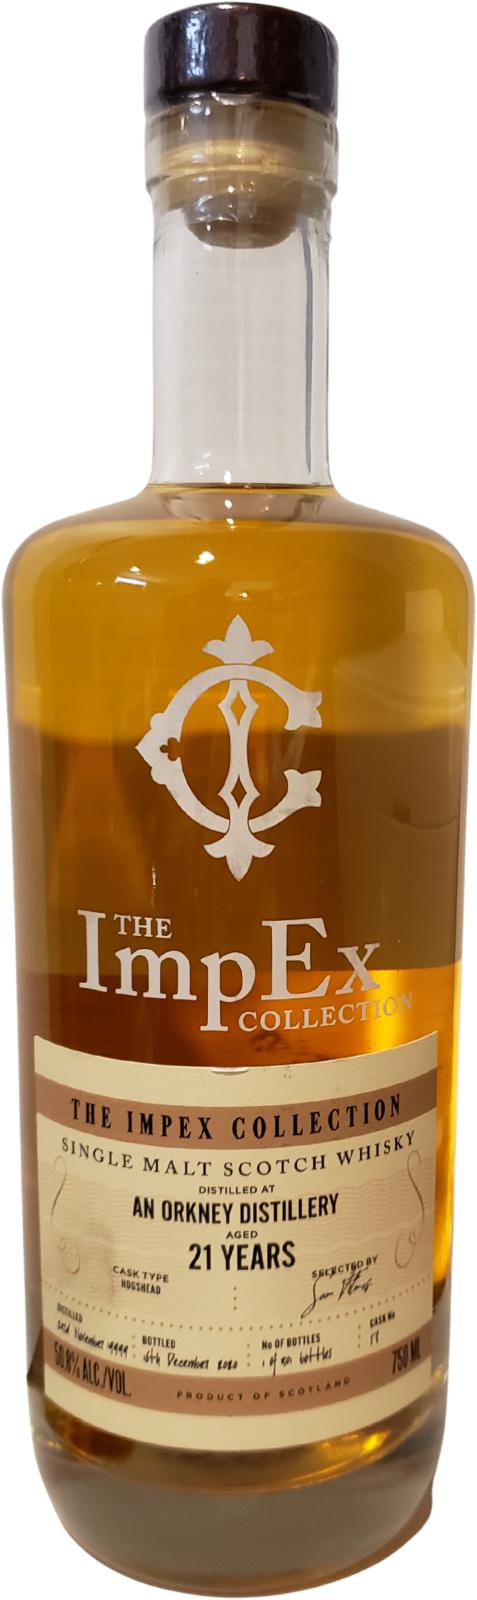 An Orkney Distillery 1999 ImpEx